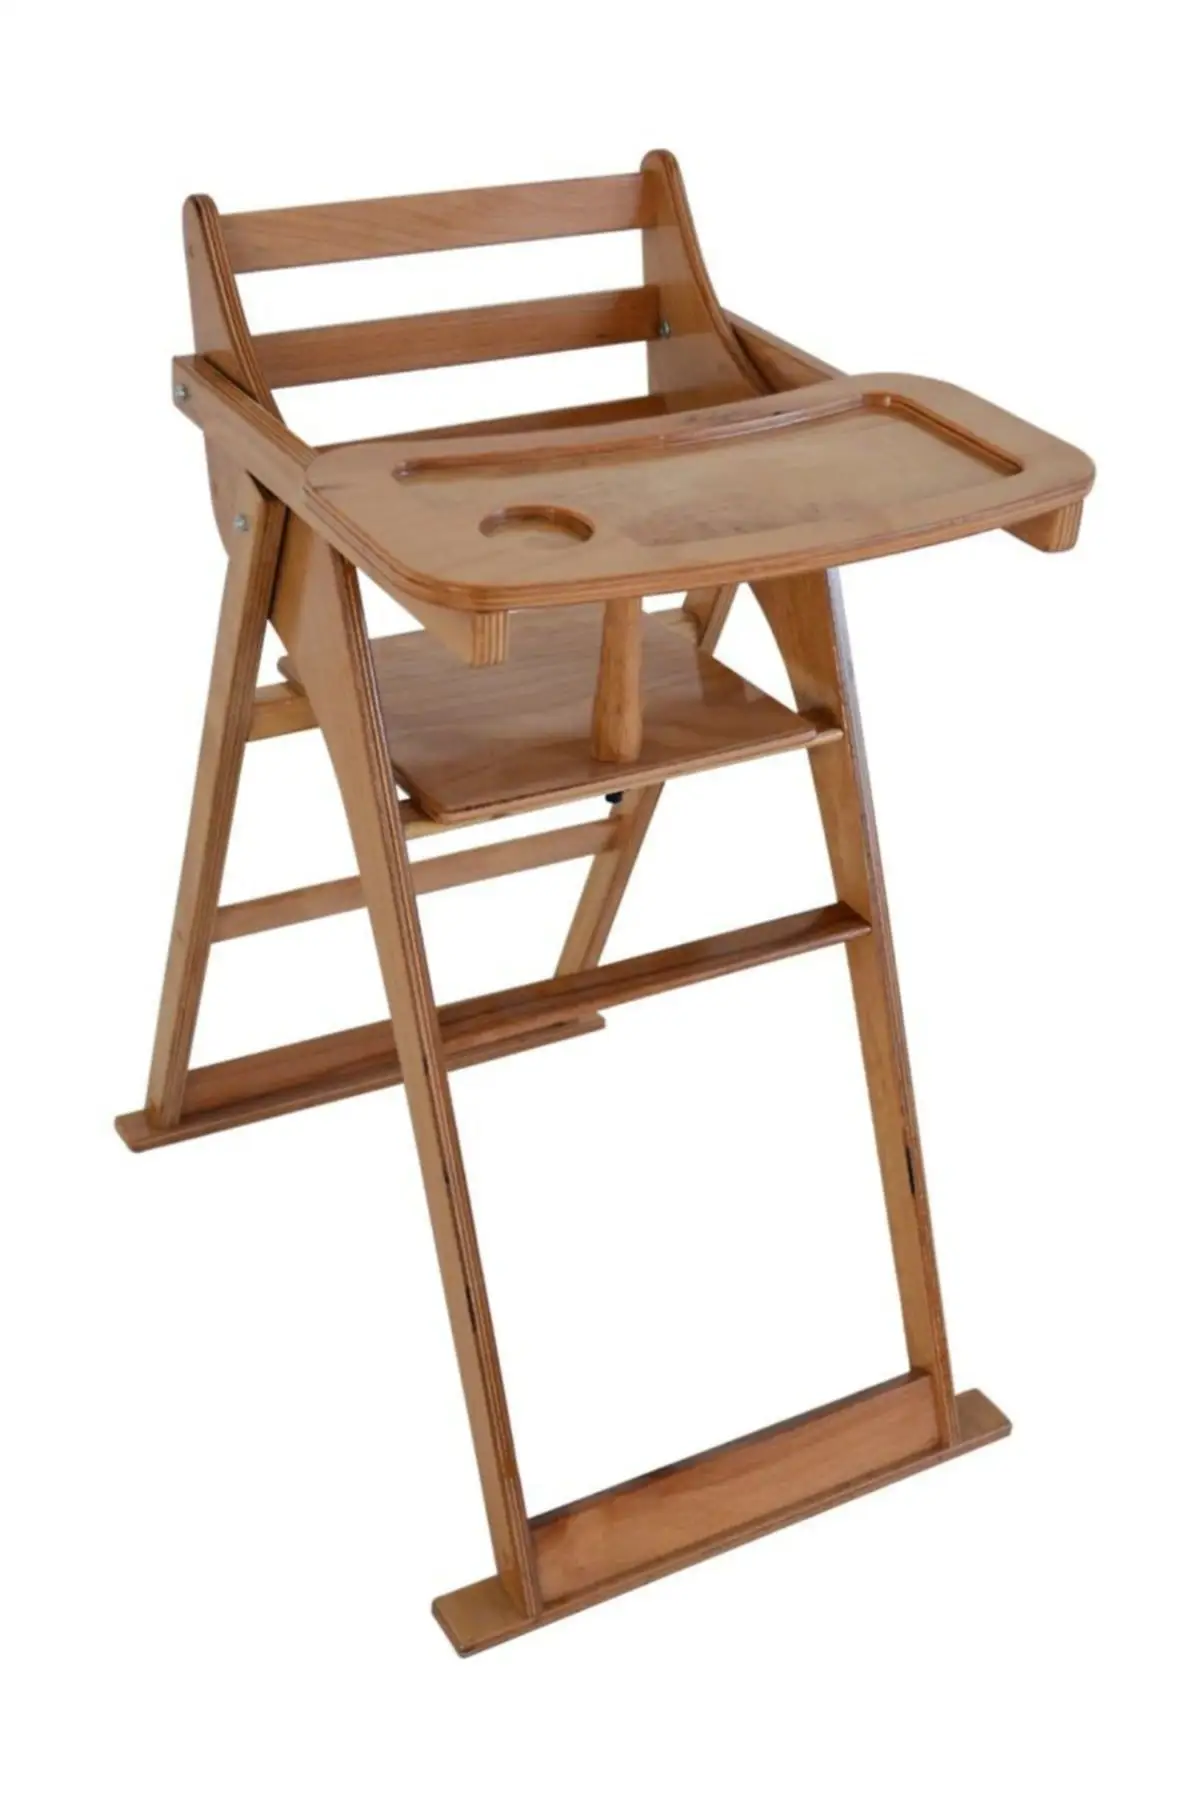 Decorative Wooden High Chair Furniture Mother Home Security Products Bebe Gift Girls Boys Kids Accessories Family Care Free Shipping